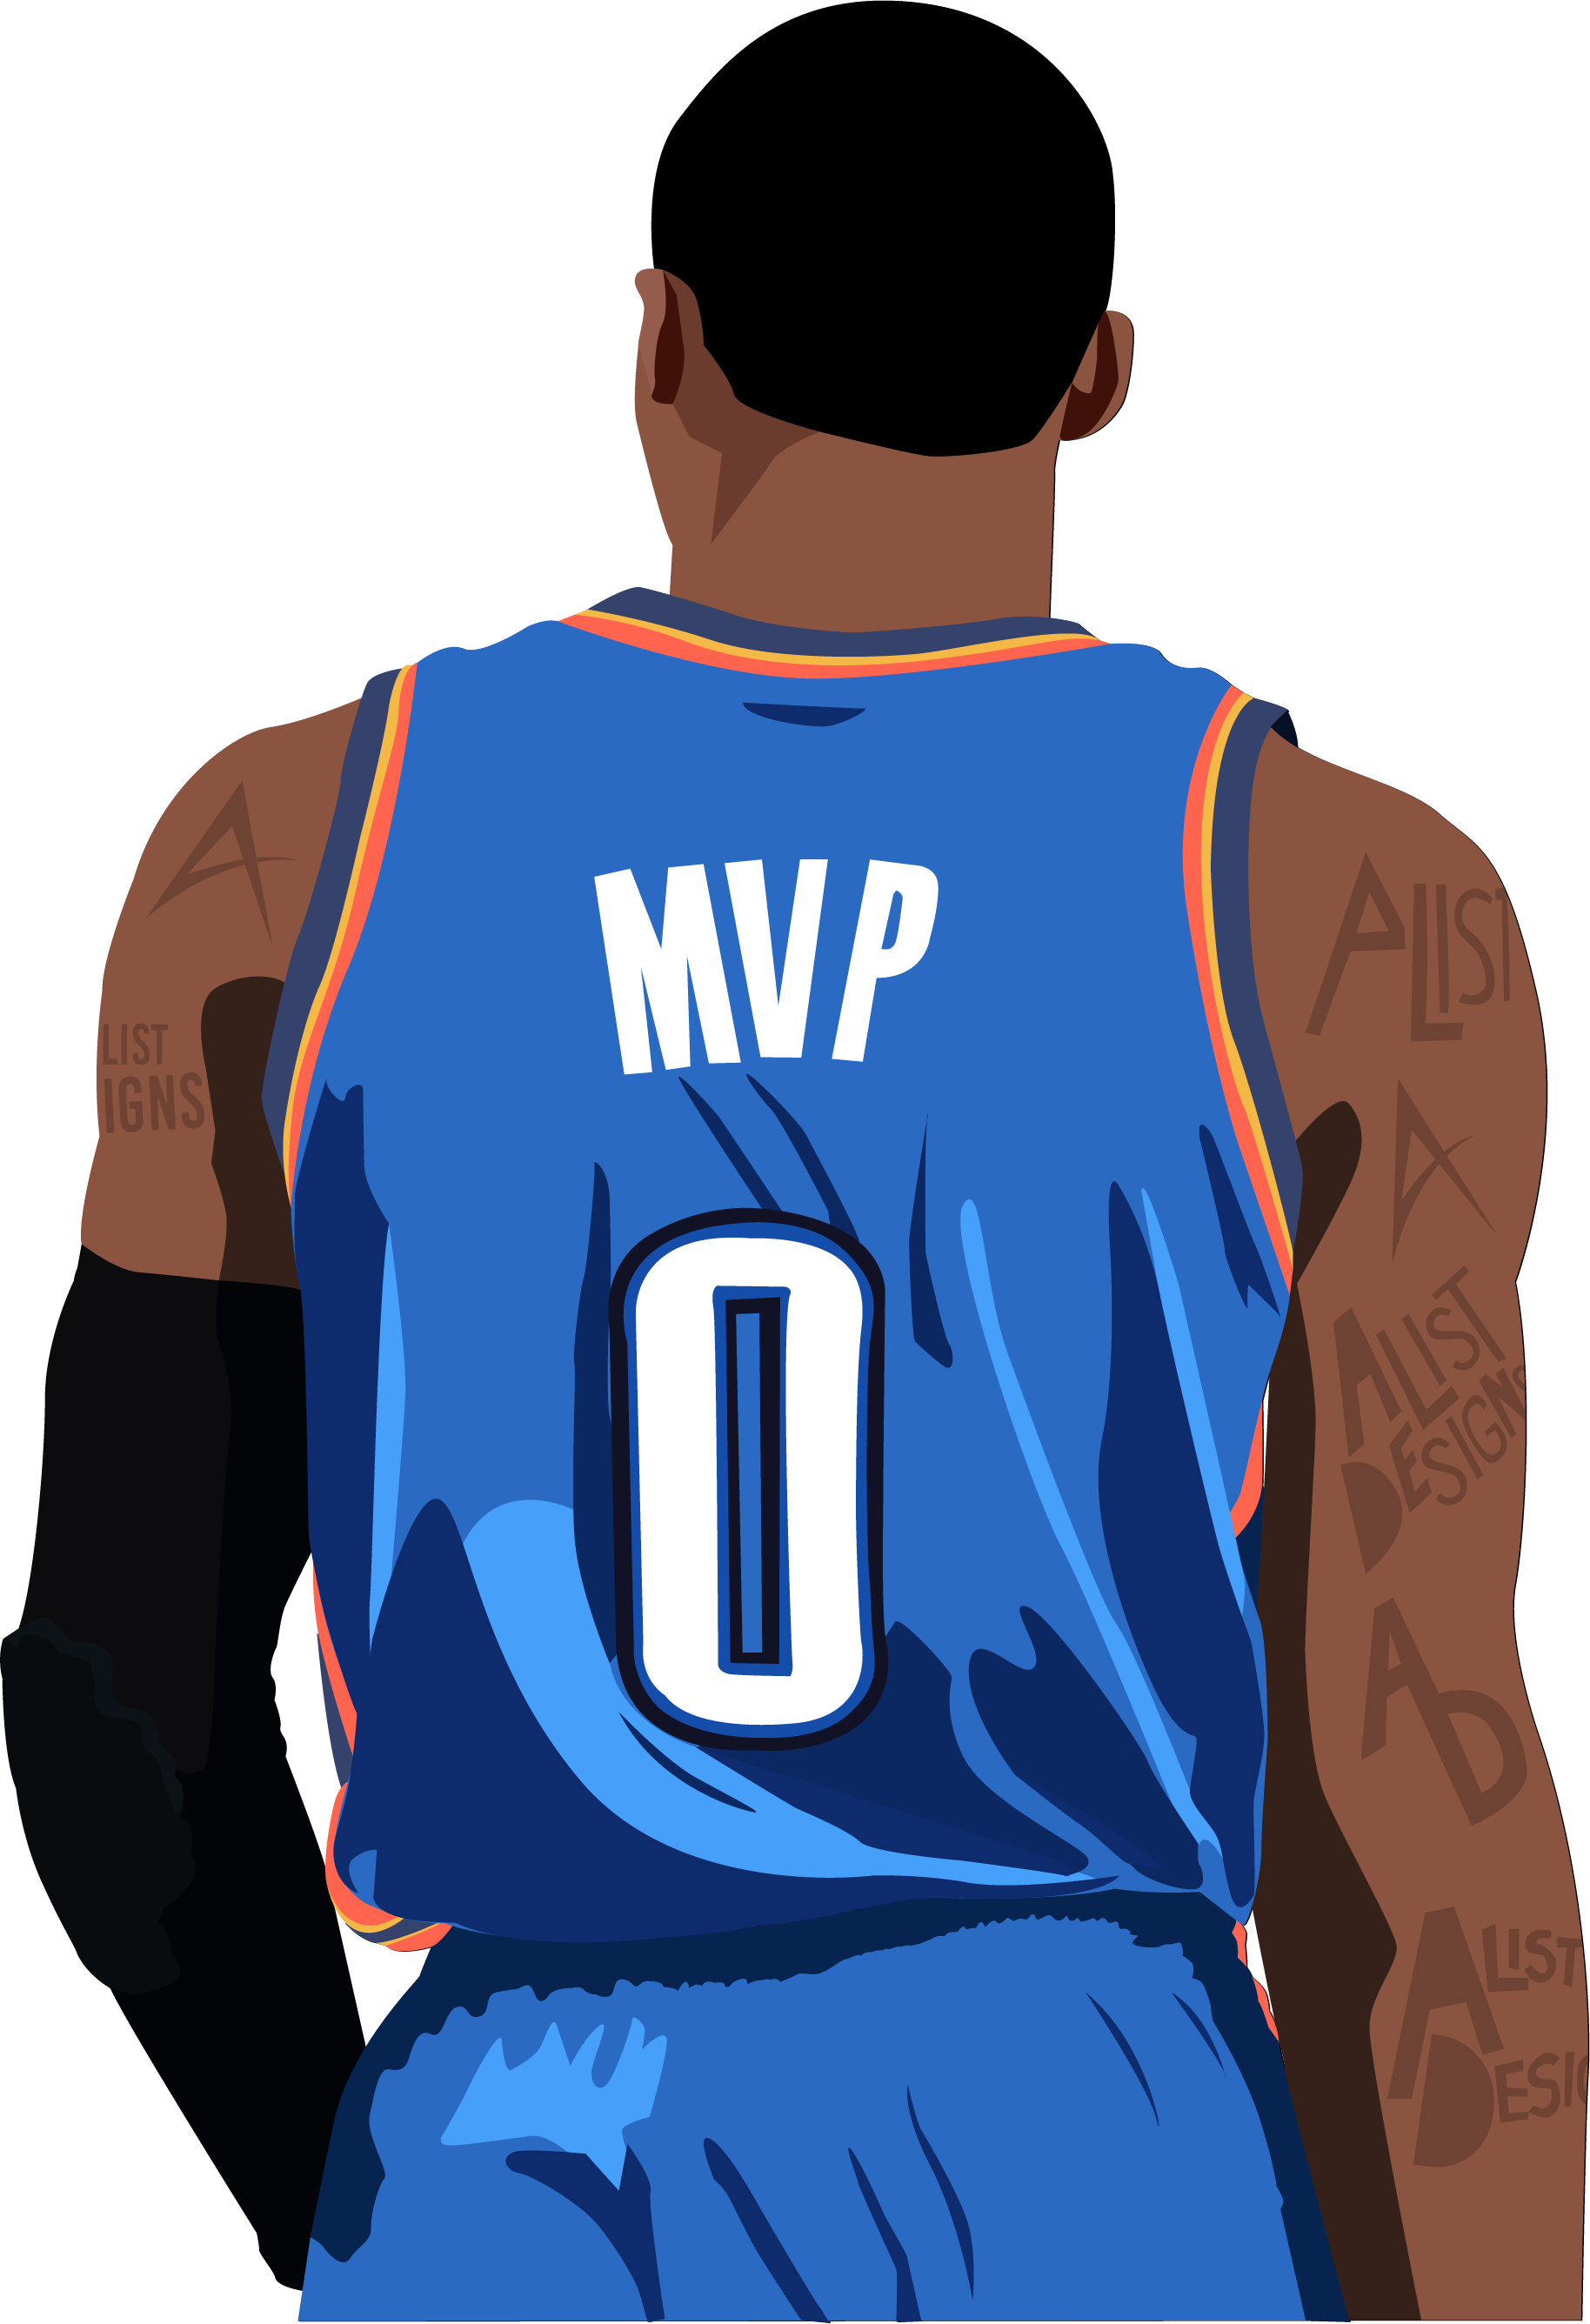 Illustration Of Nba Player Russell Westbrook, Of The - Russell Westbrook Mvp Jersey (1828x2672)